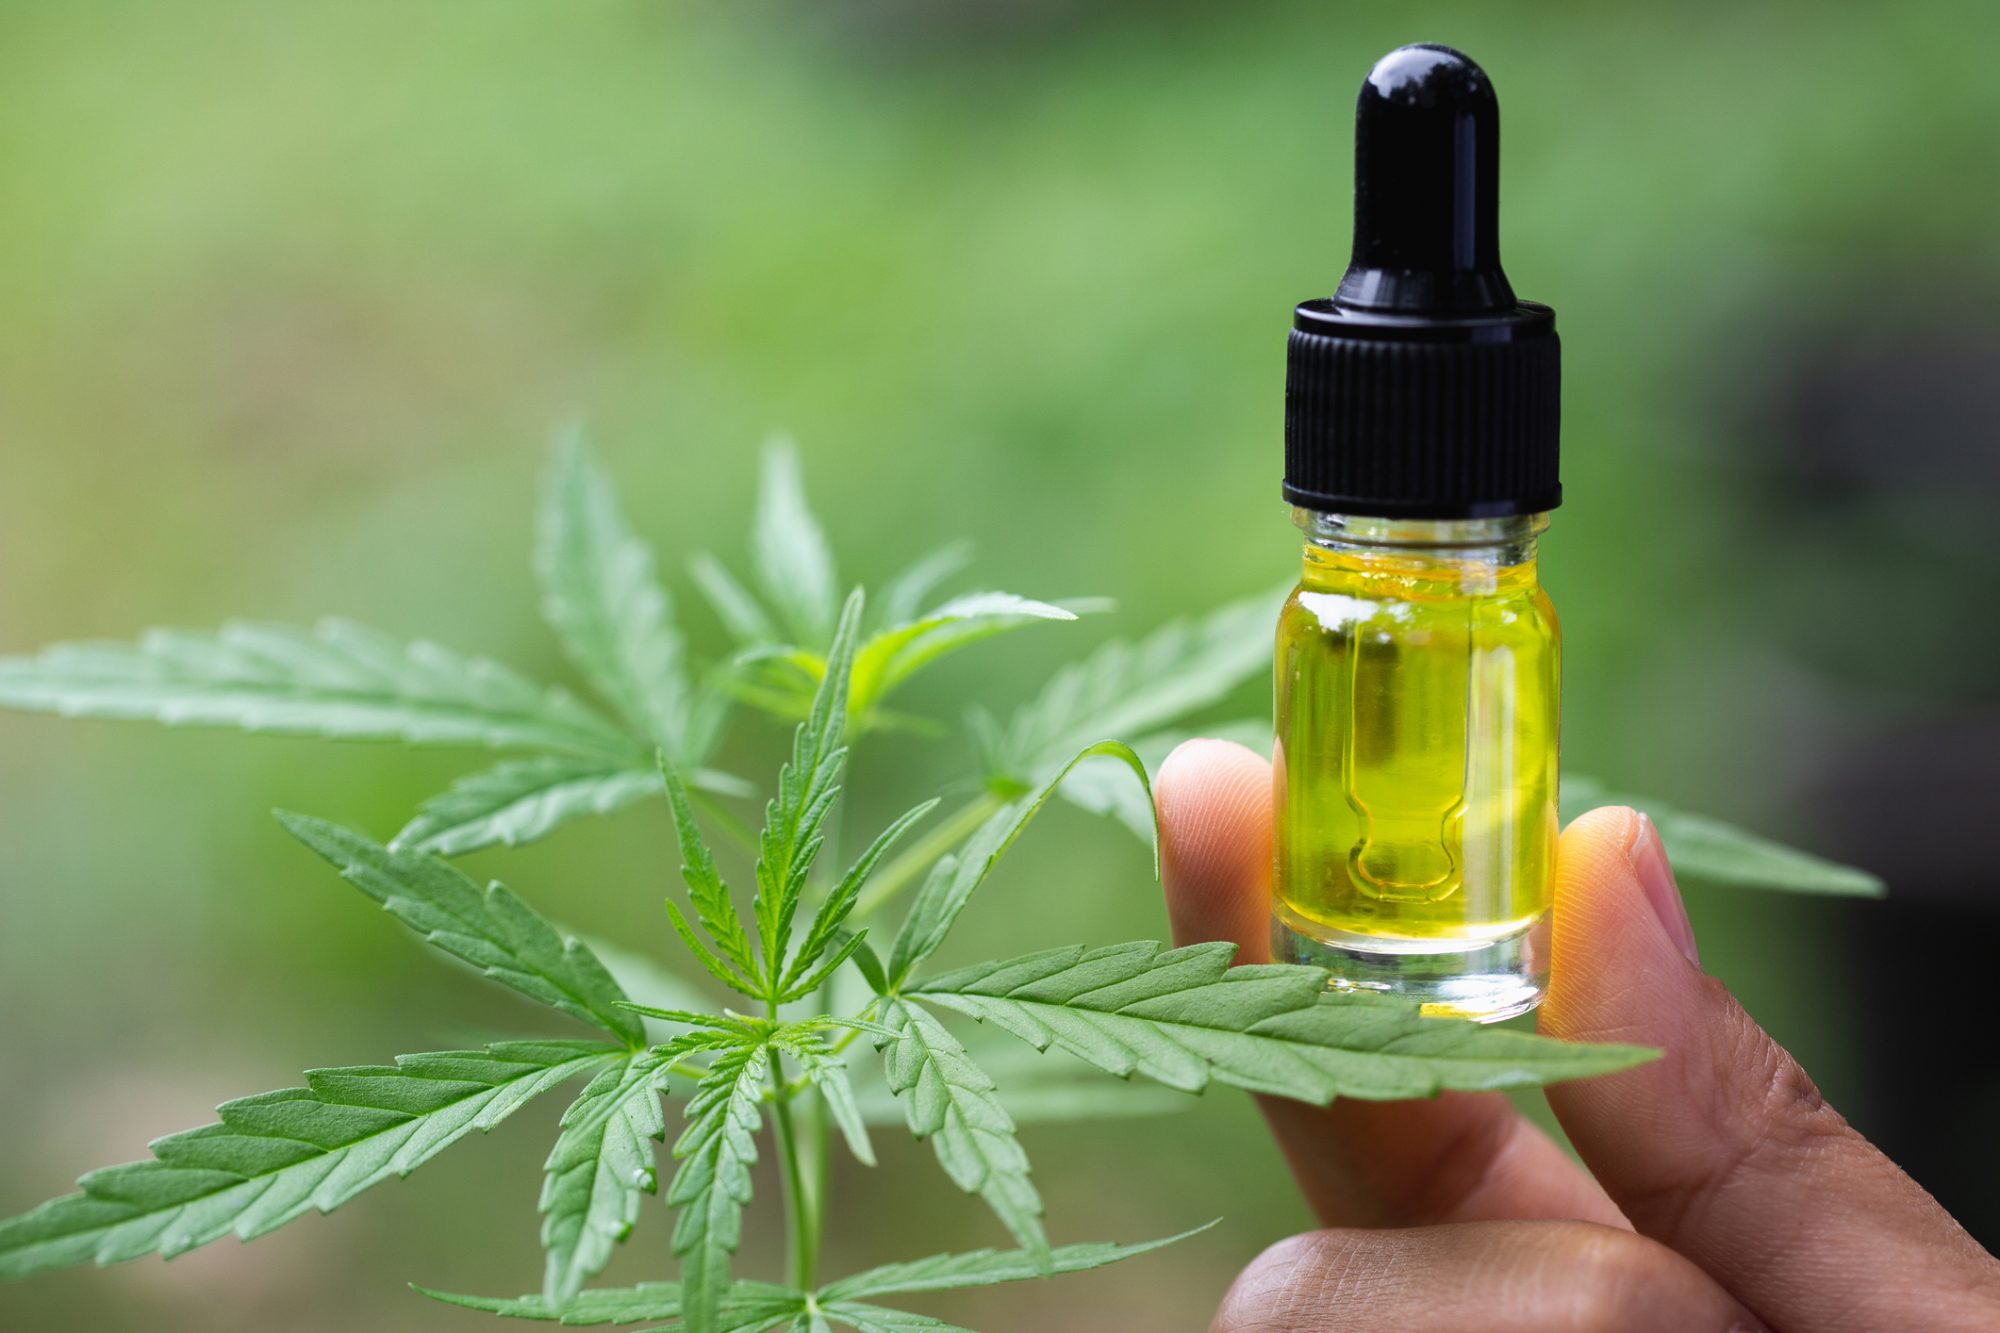 Important Things to Know When Buying CBD Products